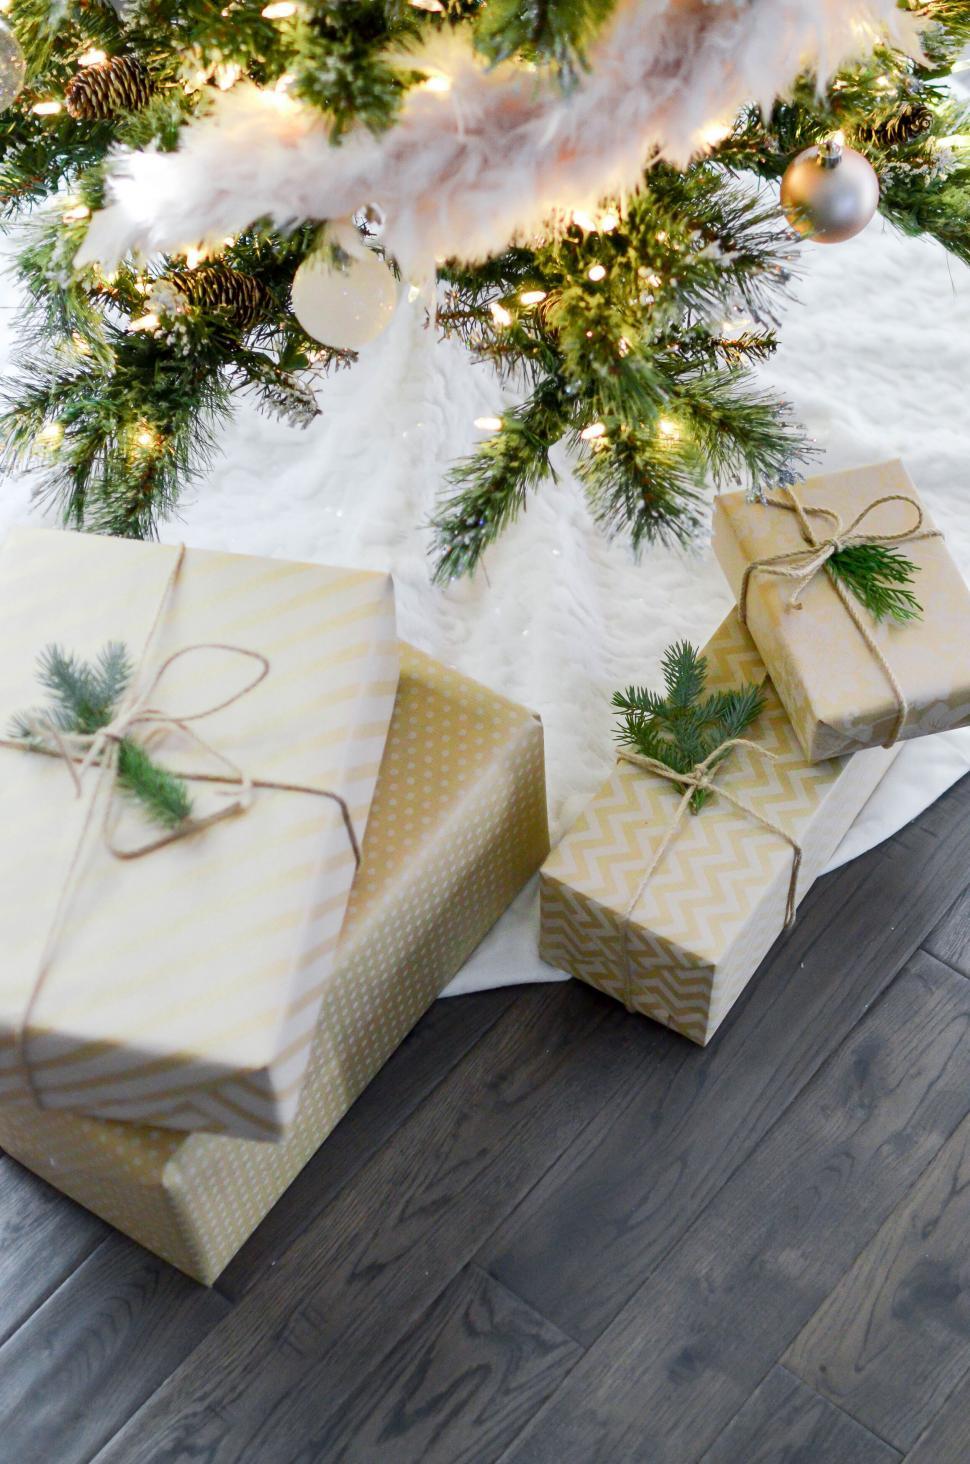 Free Image of Christmas gifts under a decorated tree 